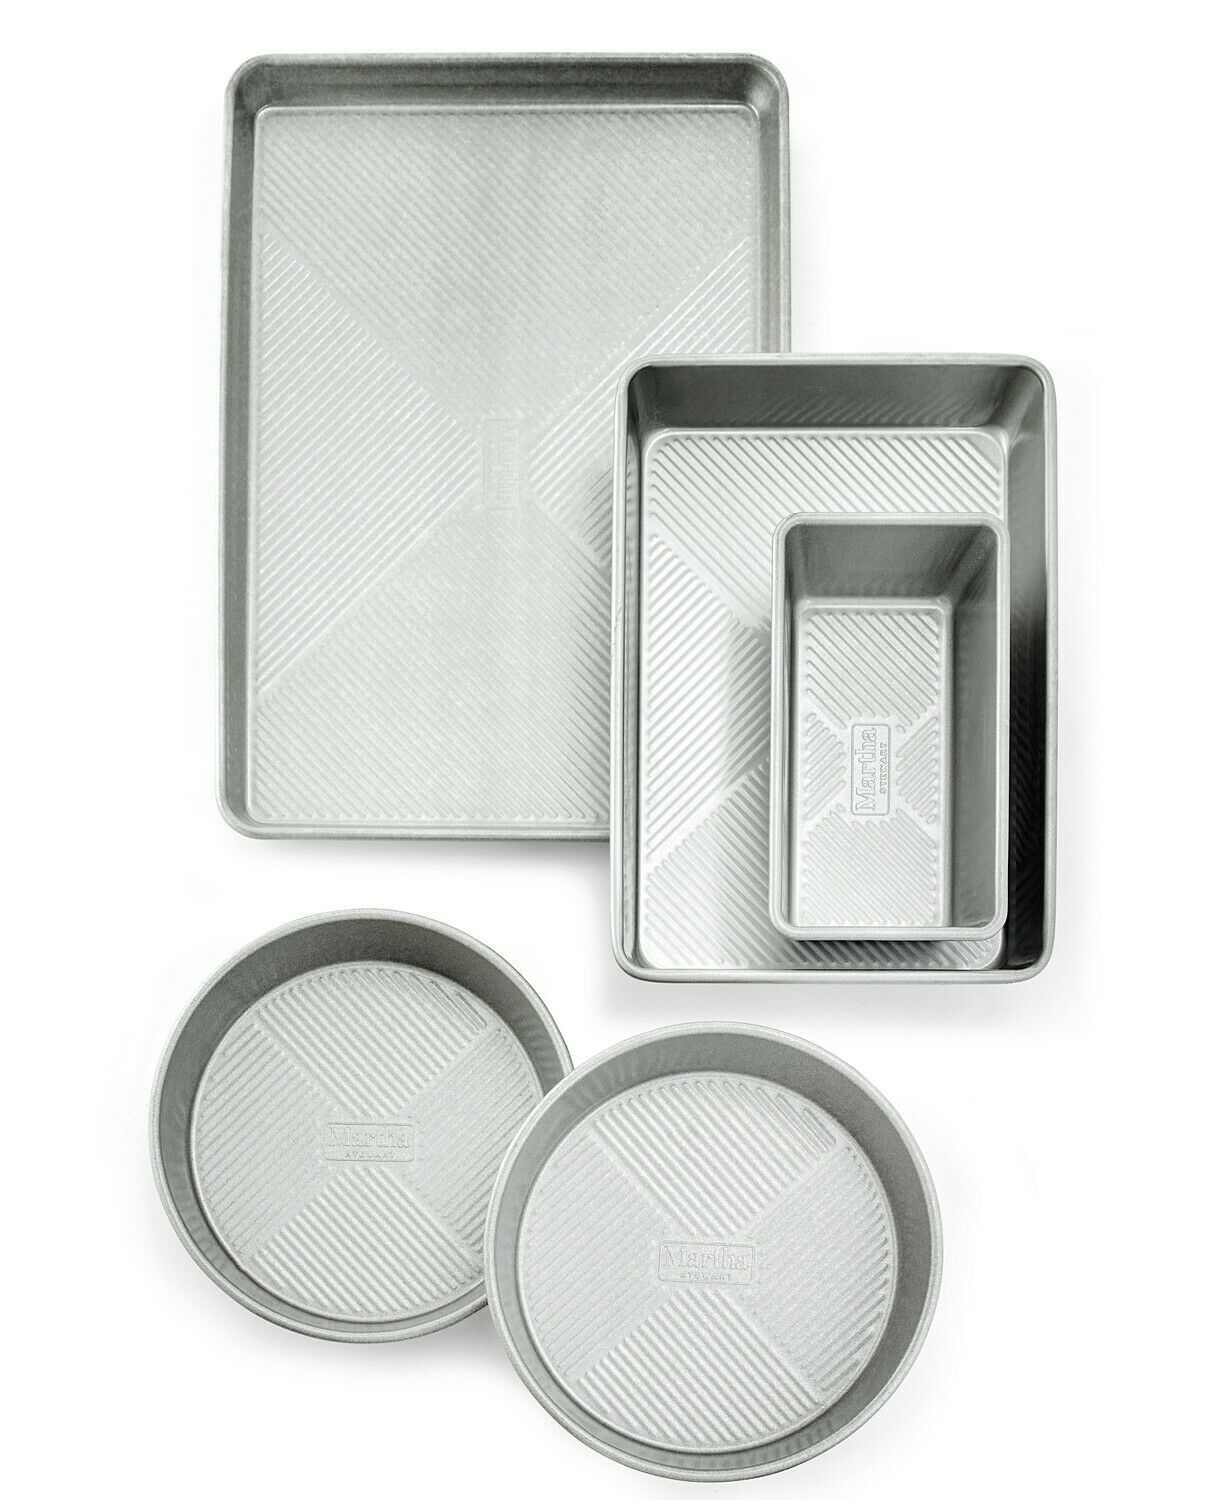 Martha Stewart Collection 5-Pc. Bakeware Set, Created for Macy's - $88.21